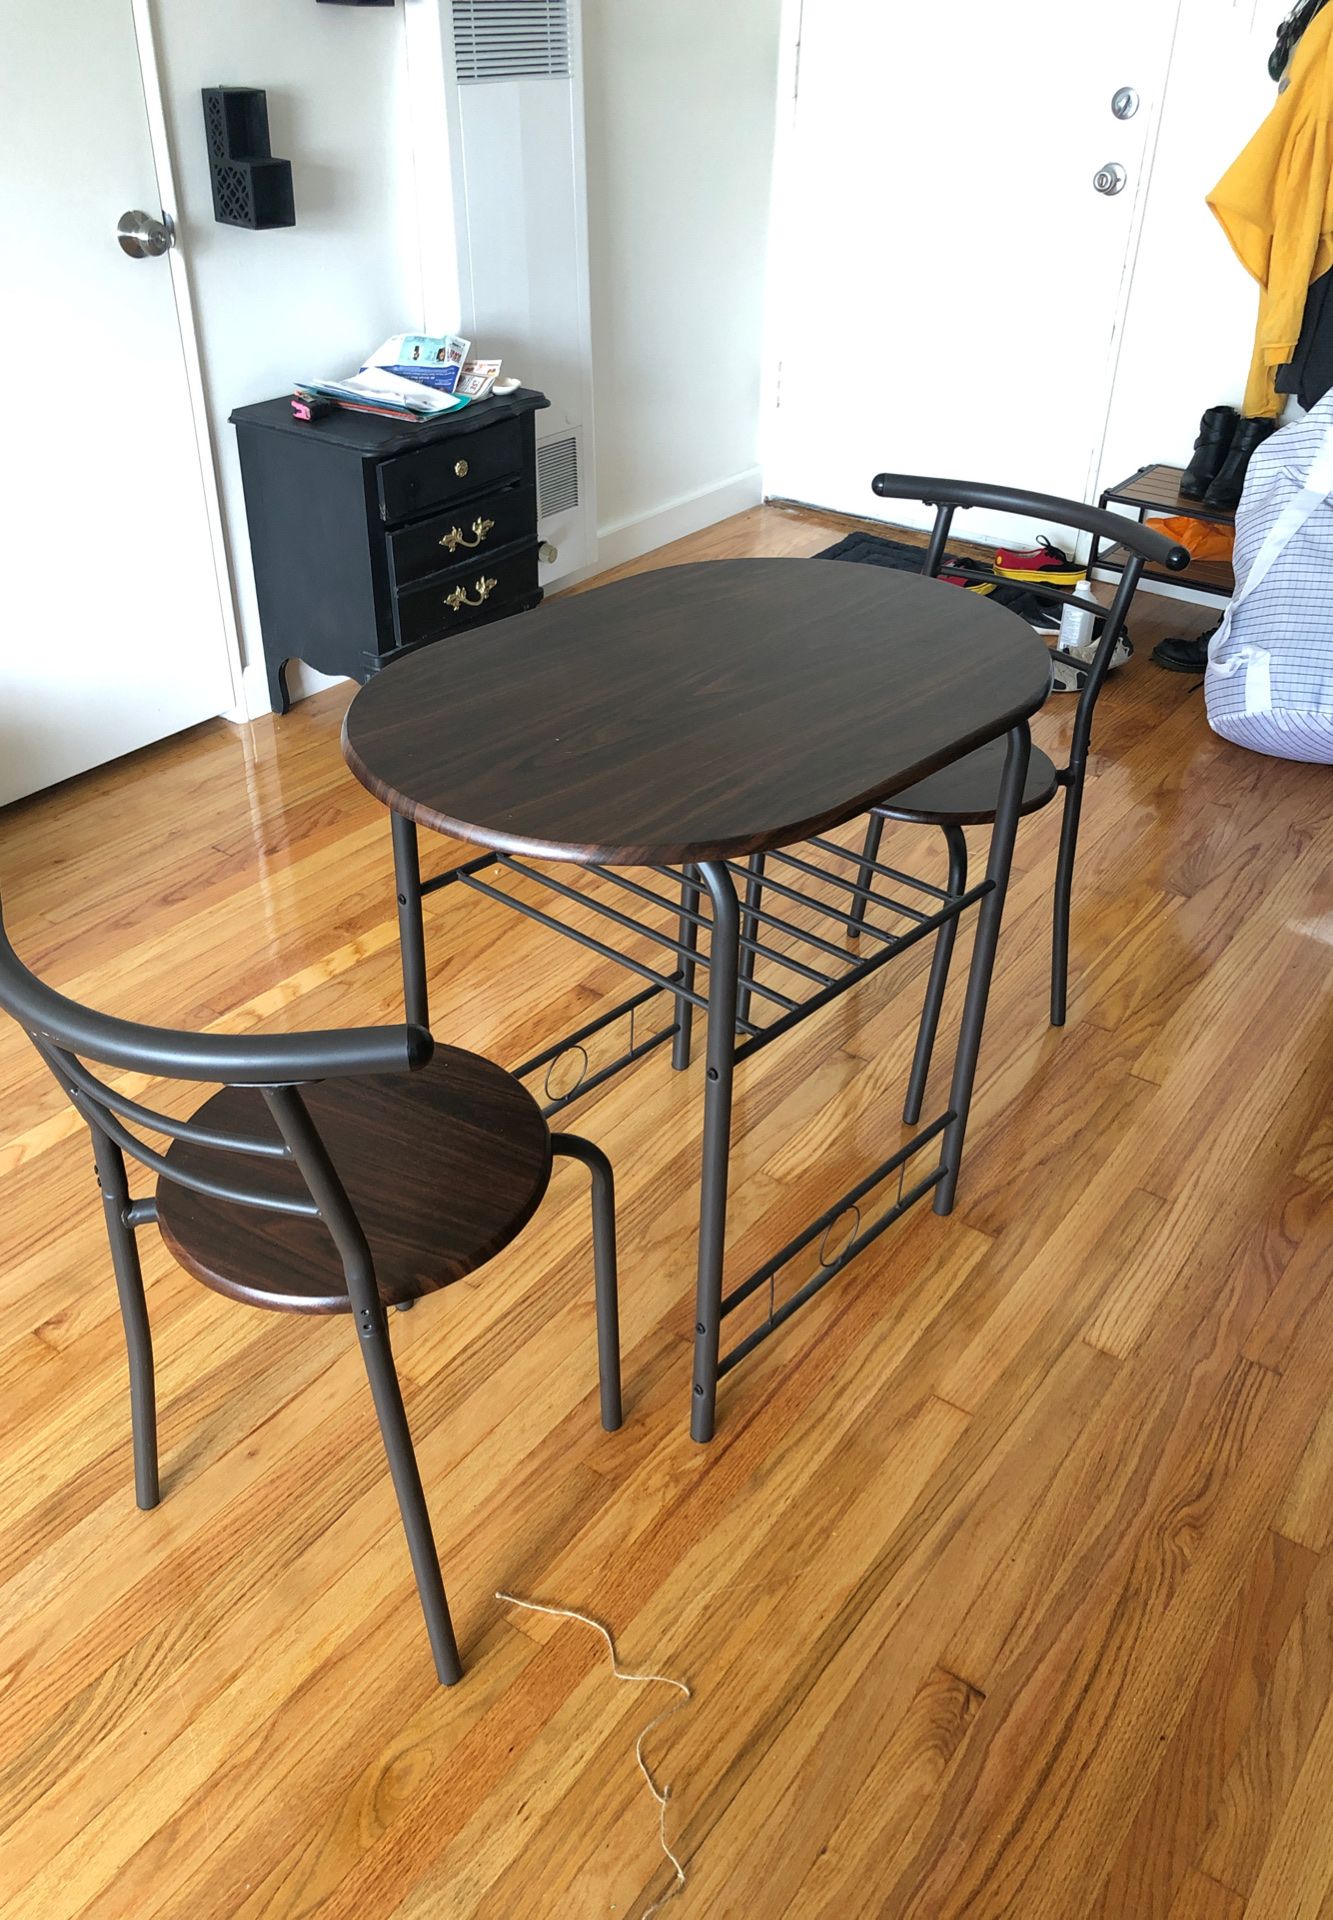 Small kitchen table withy 2 chairs